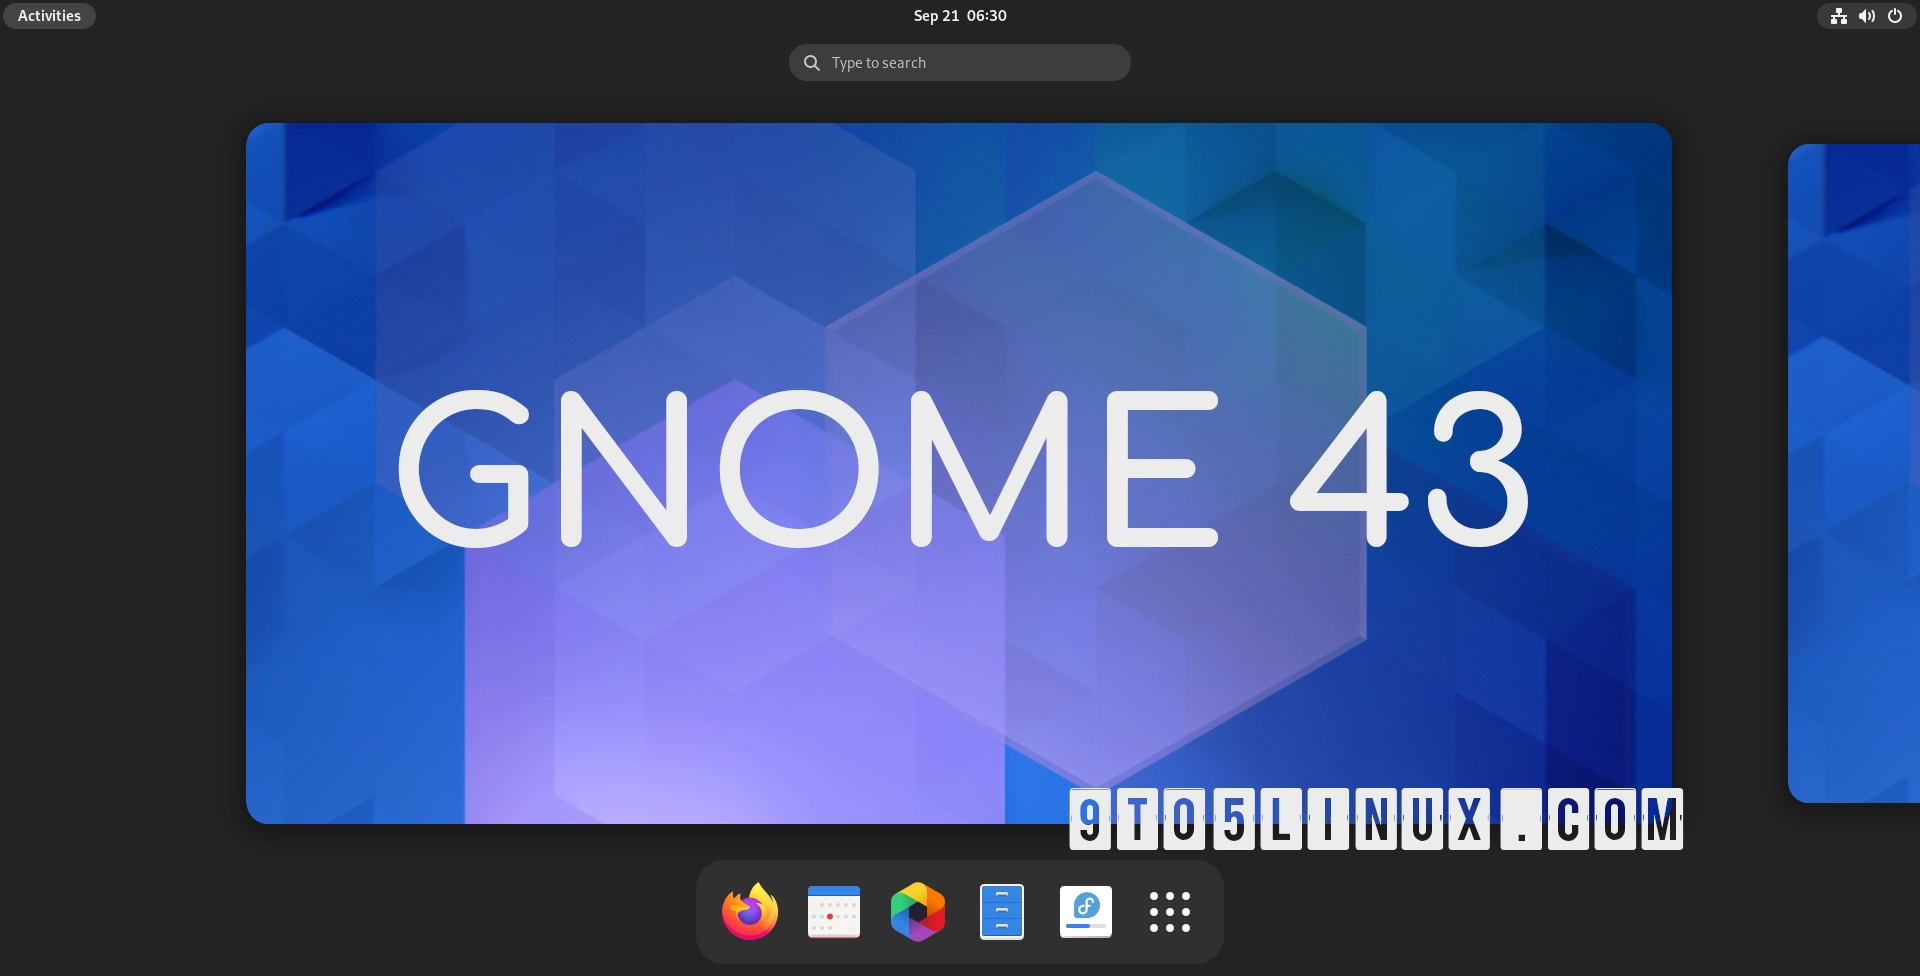 GNOME 43 Released with Quick Settings, More GTK 4 Ports, and New Device Security Panel